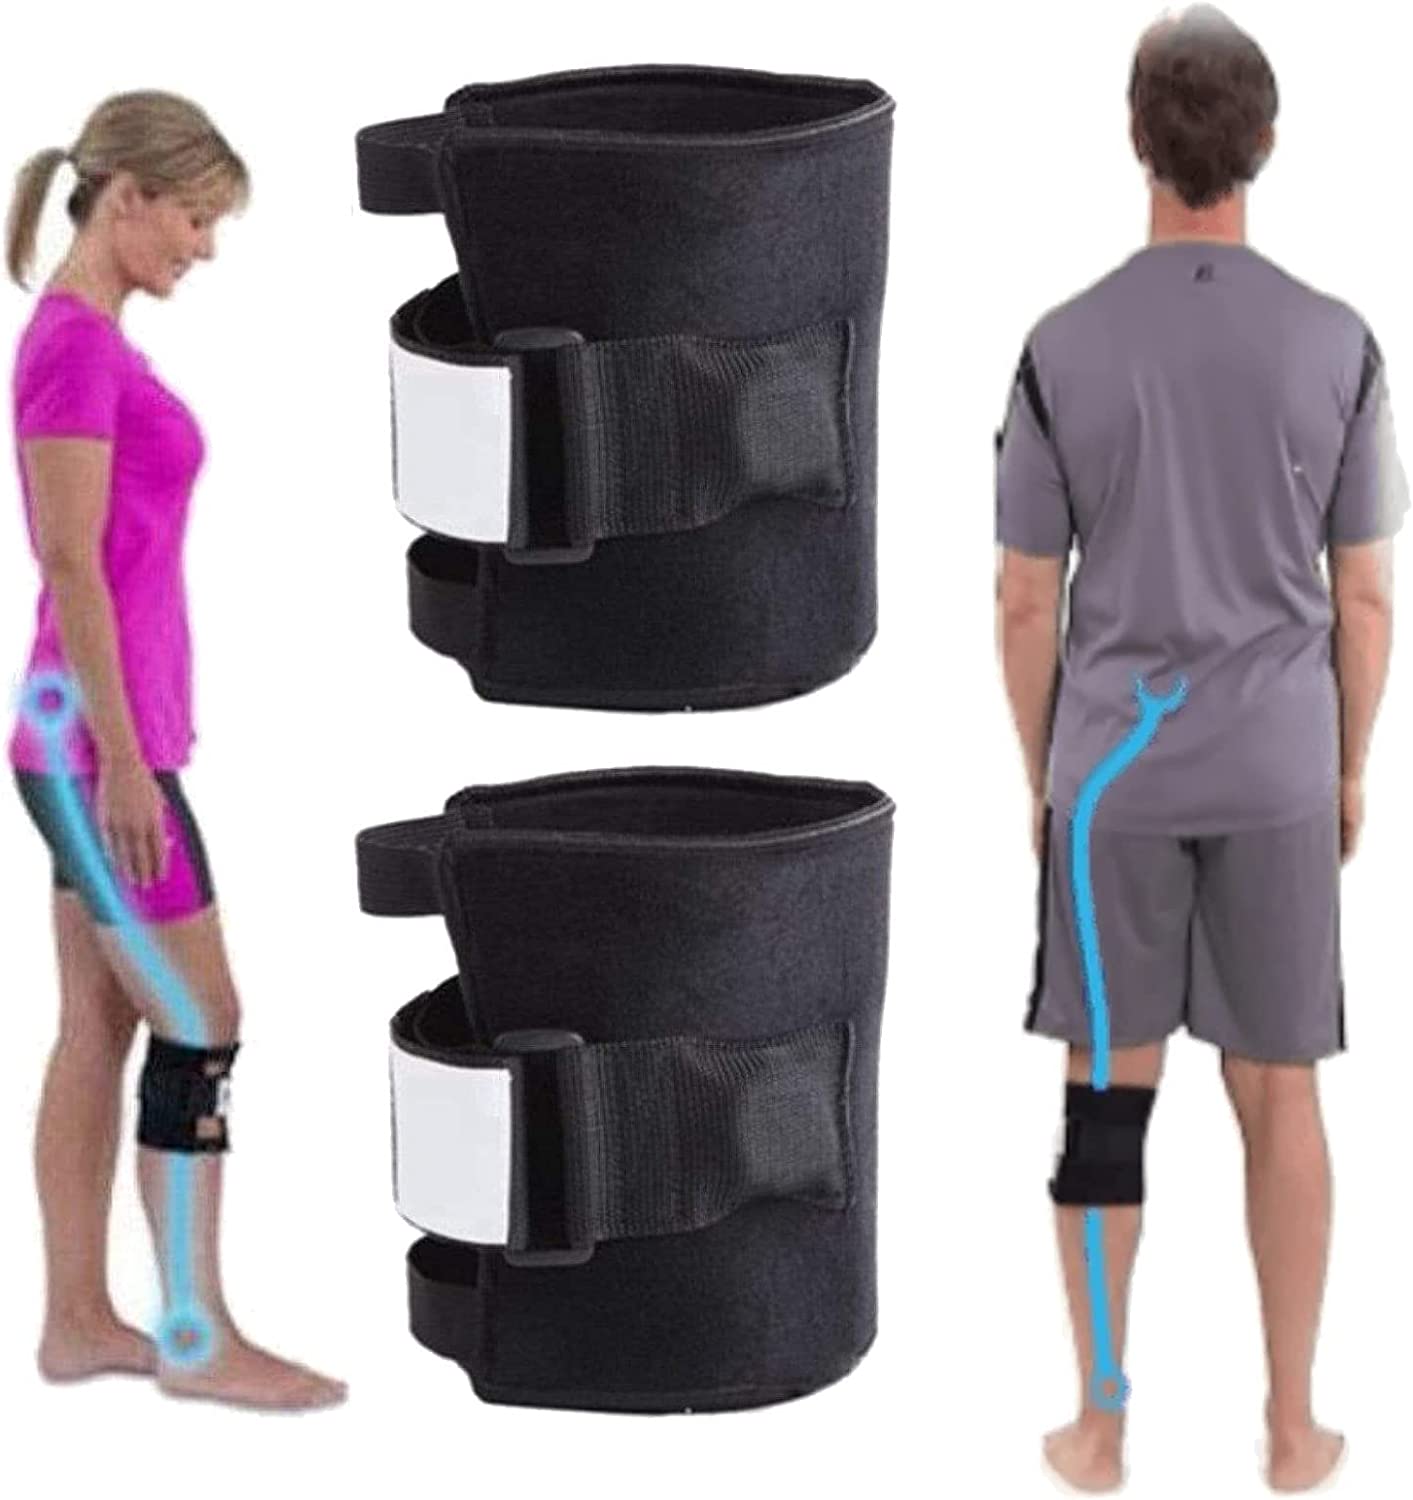 Sciatica Pain Relief Brace - Pressure Point Brace Relieve Acupressure Leg Sciatica,beactive Brace for Sciatica As Seen On TV,Adjustable Compression Knee Support Brace